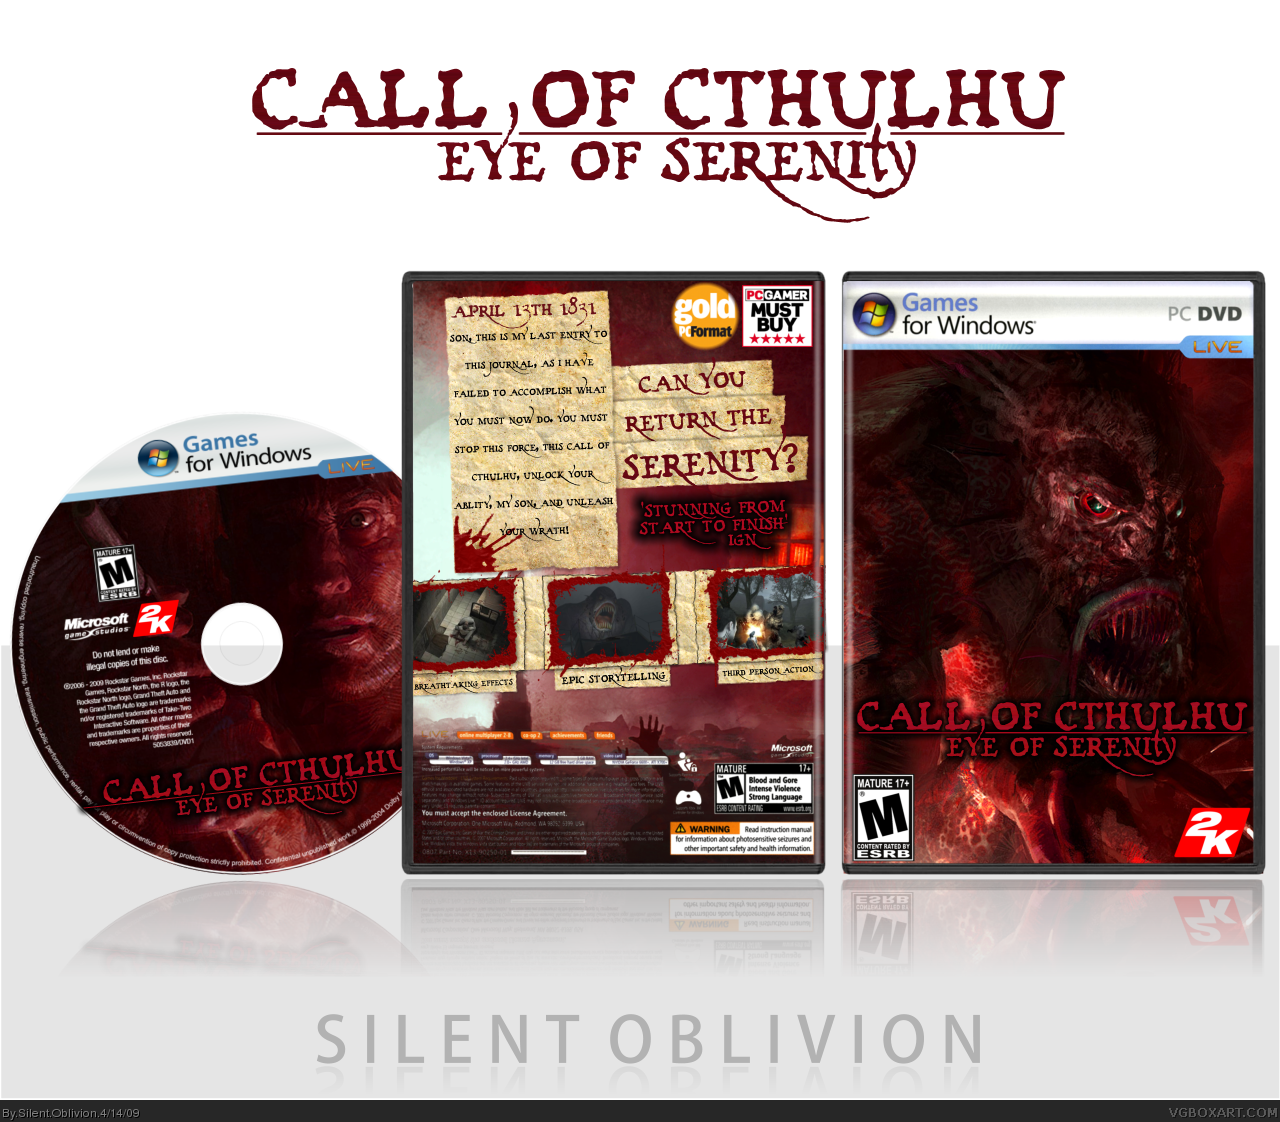 Call of Cthulhu: Eye of Serenity box cover